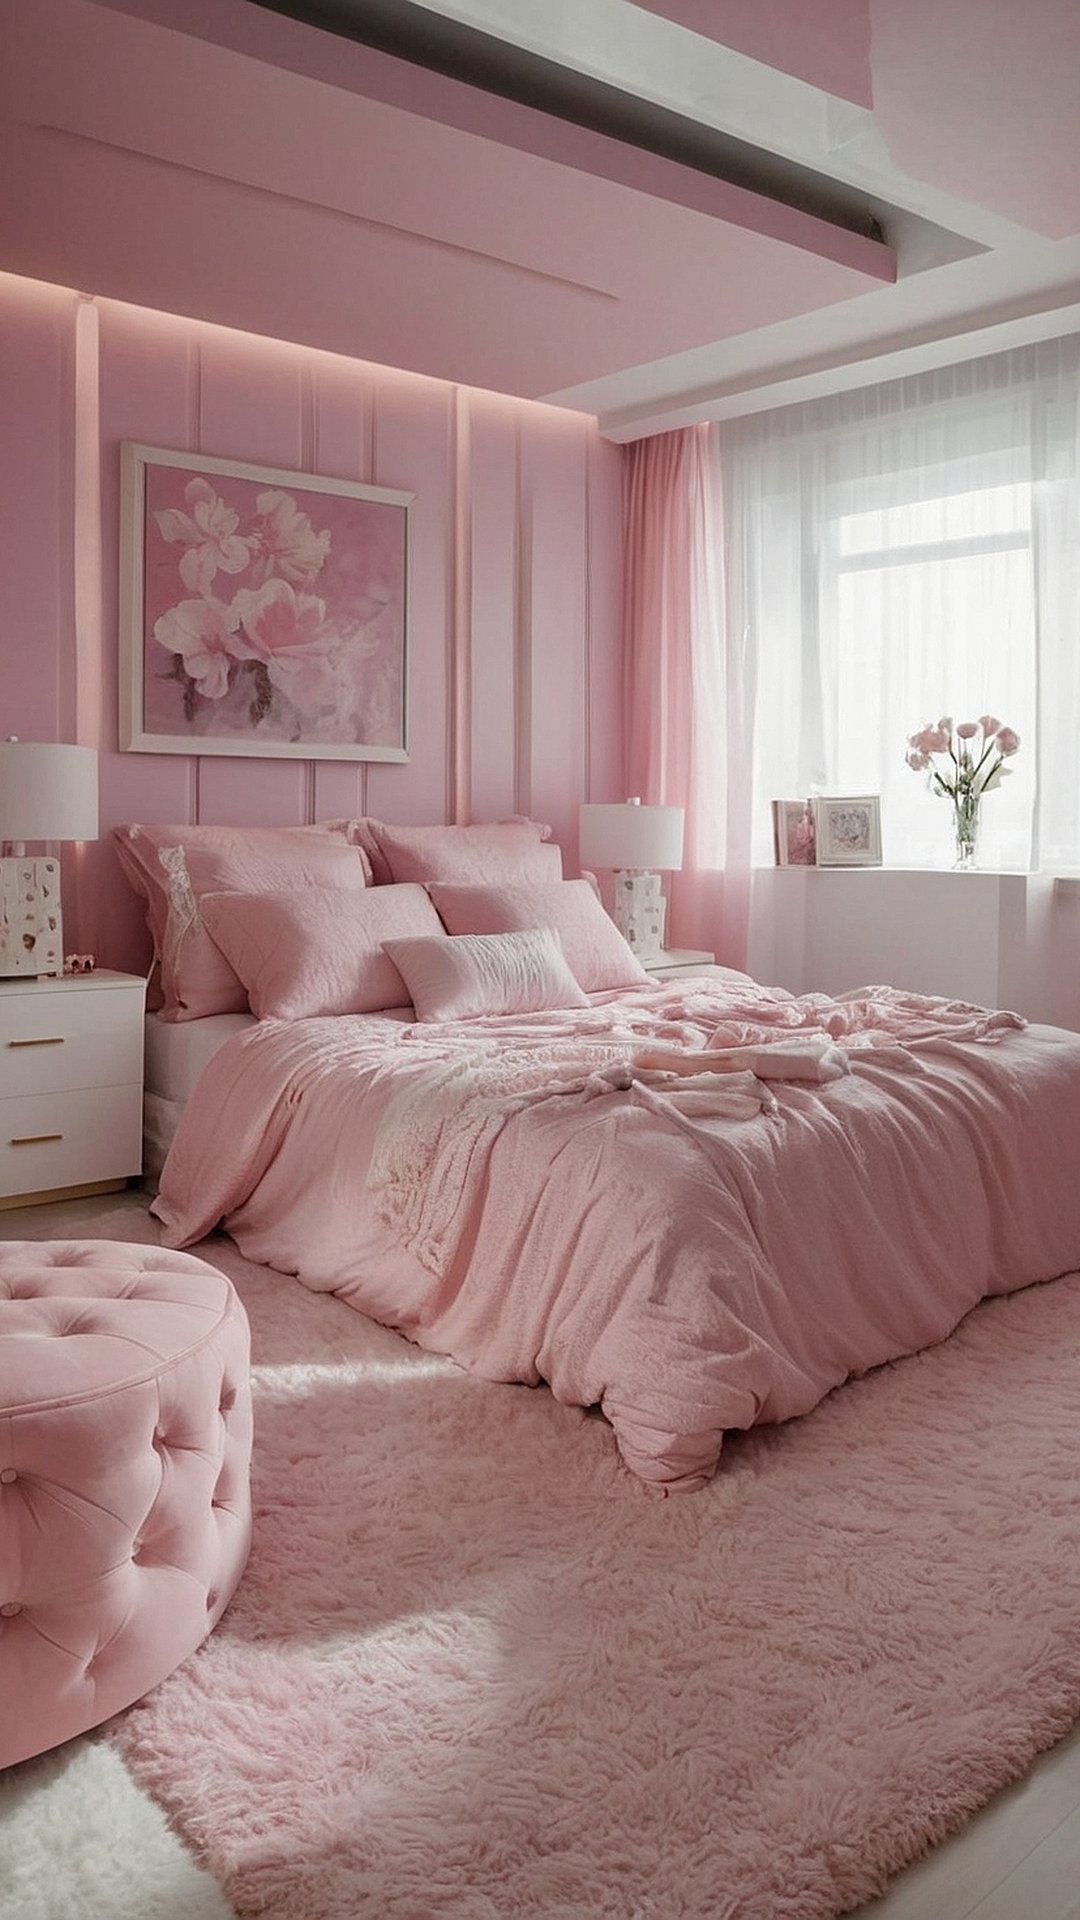 Pretty in Pink: Refreshing Bedroom Decor Ideas